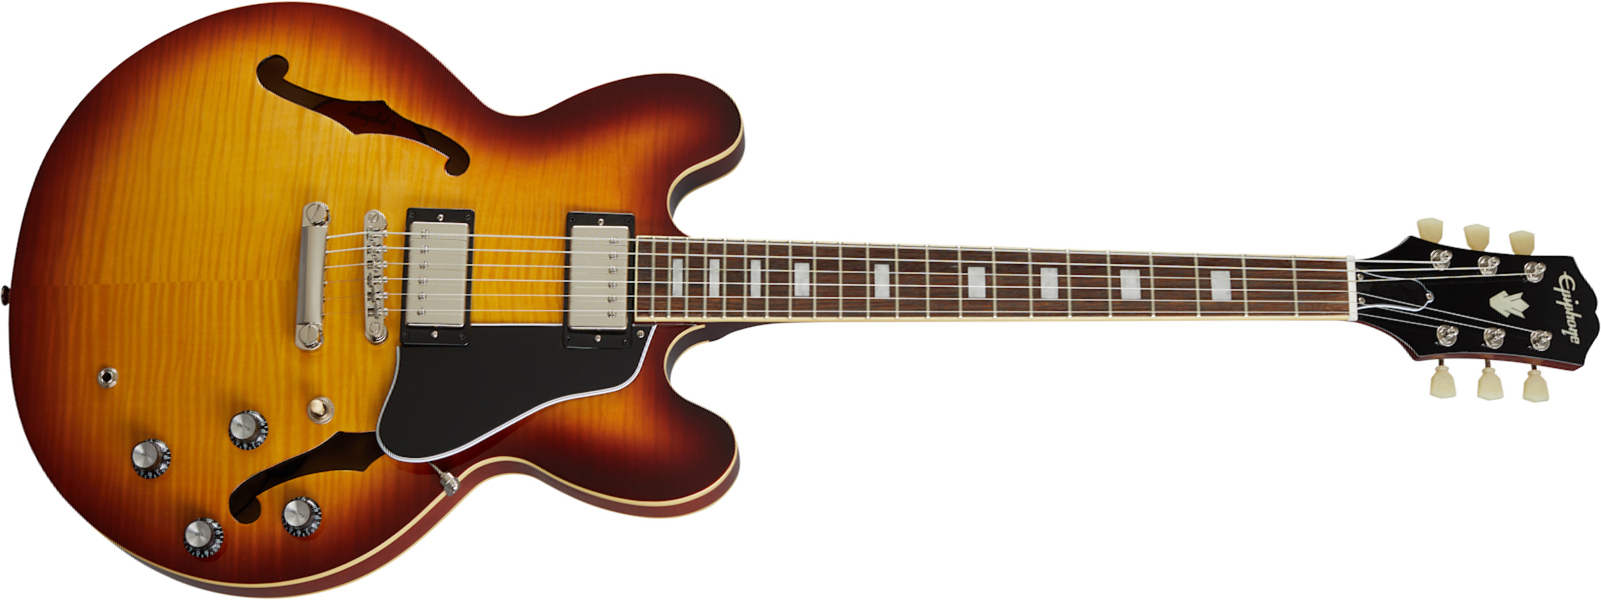 Epiphone Es-335 Figured Inspired By Gibson Original 2h Ht Rw - Raspberry Tea Burst - Semi-hollow electric guitar - Main picture